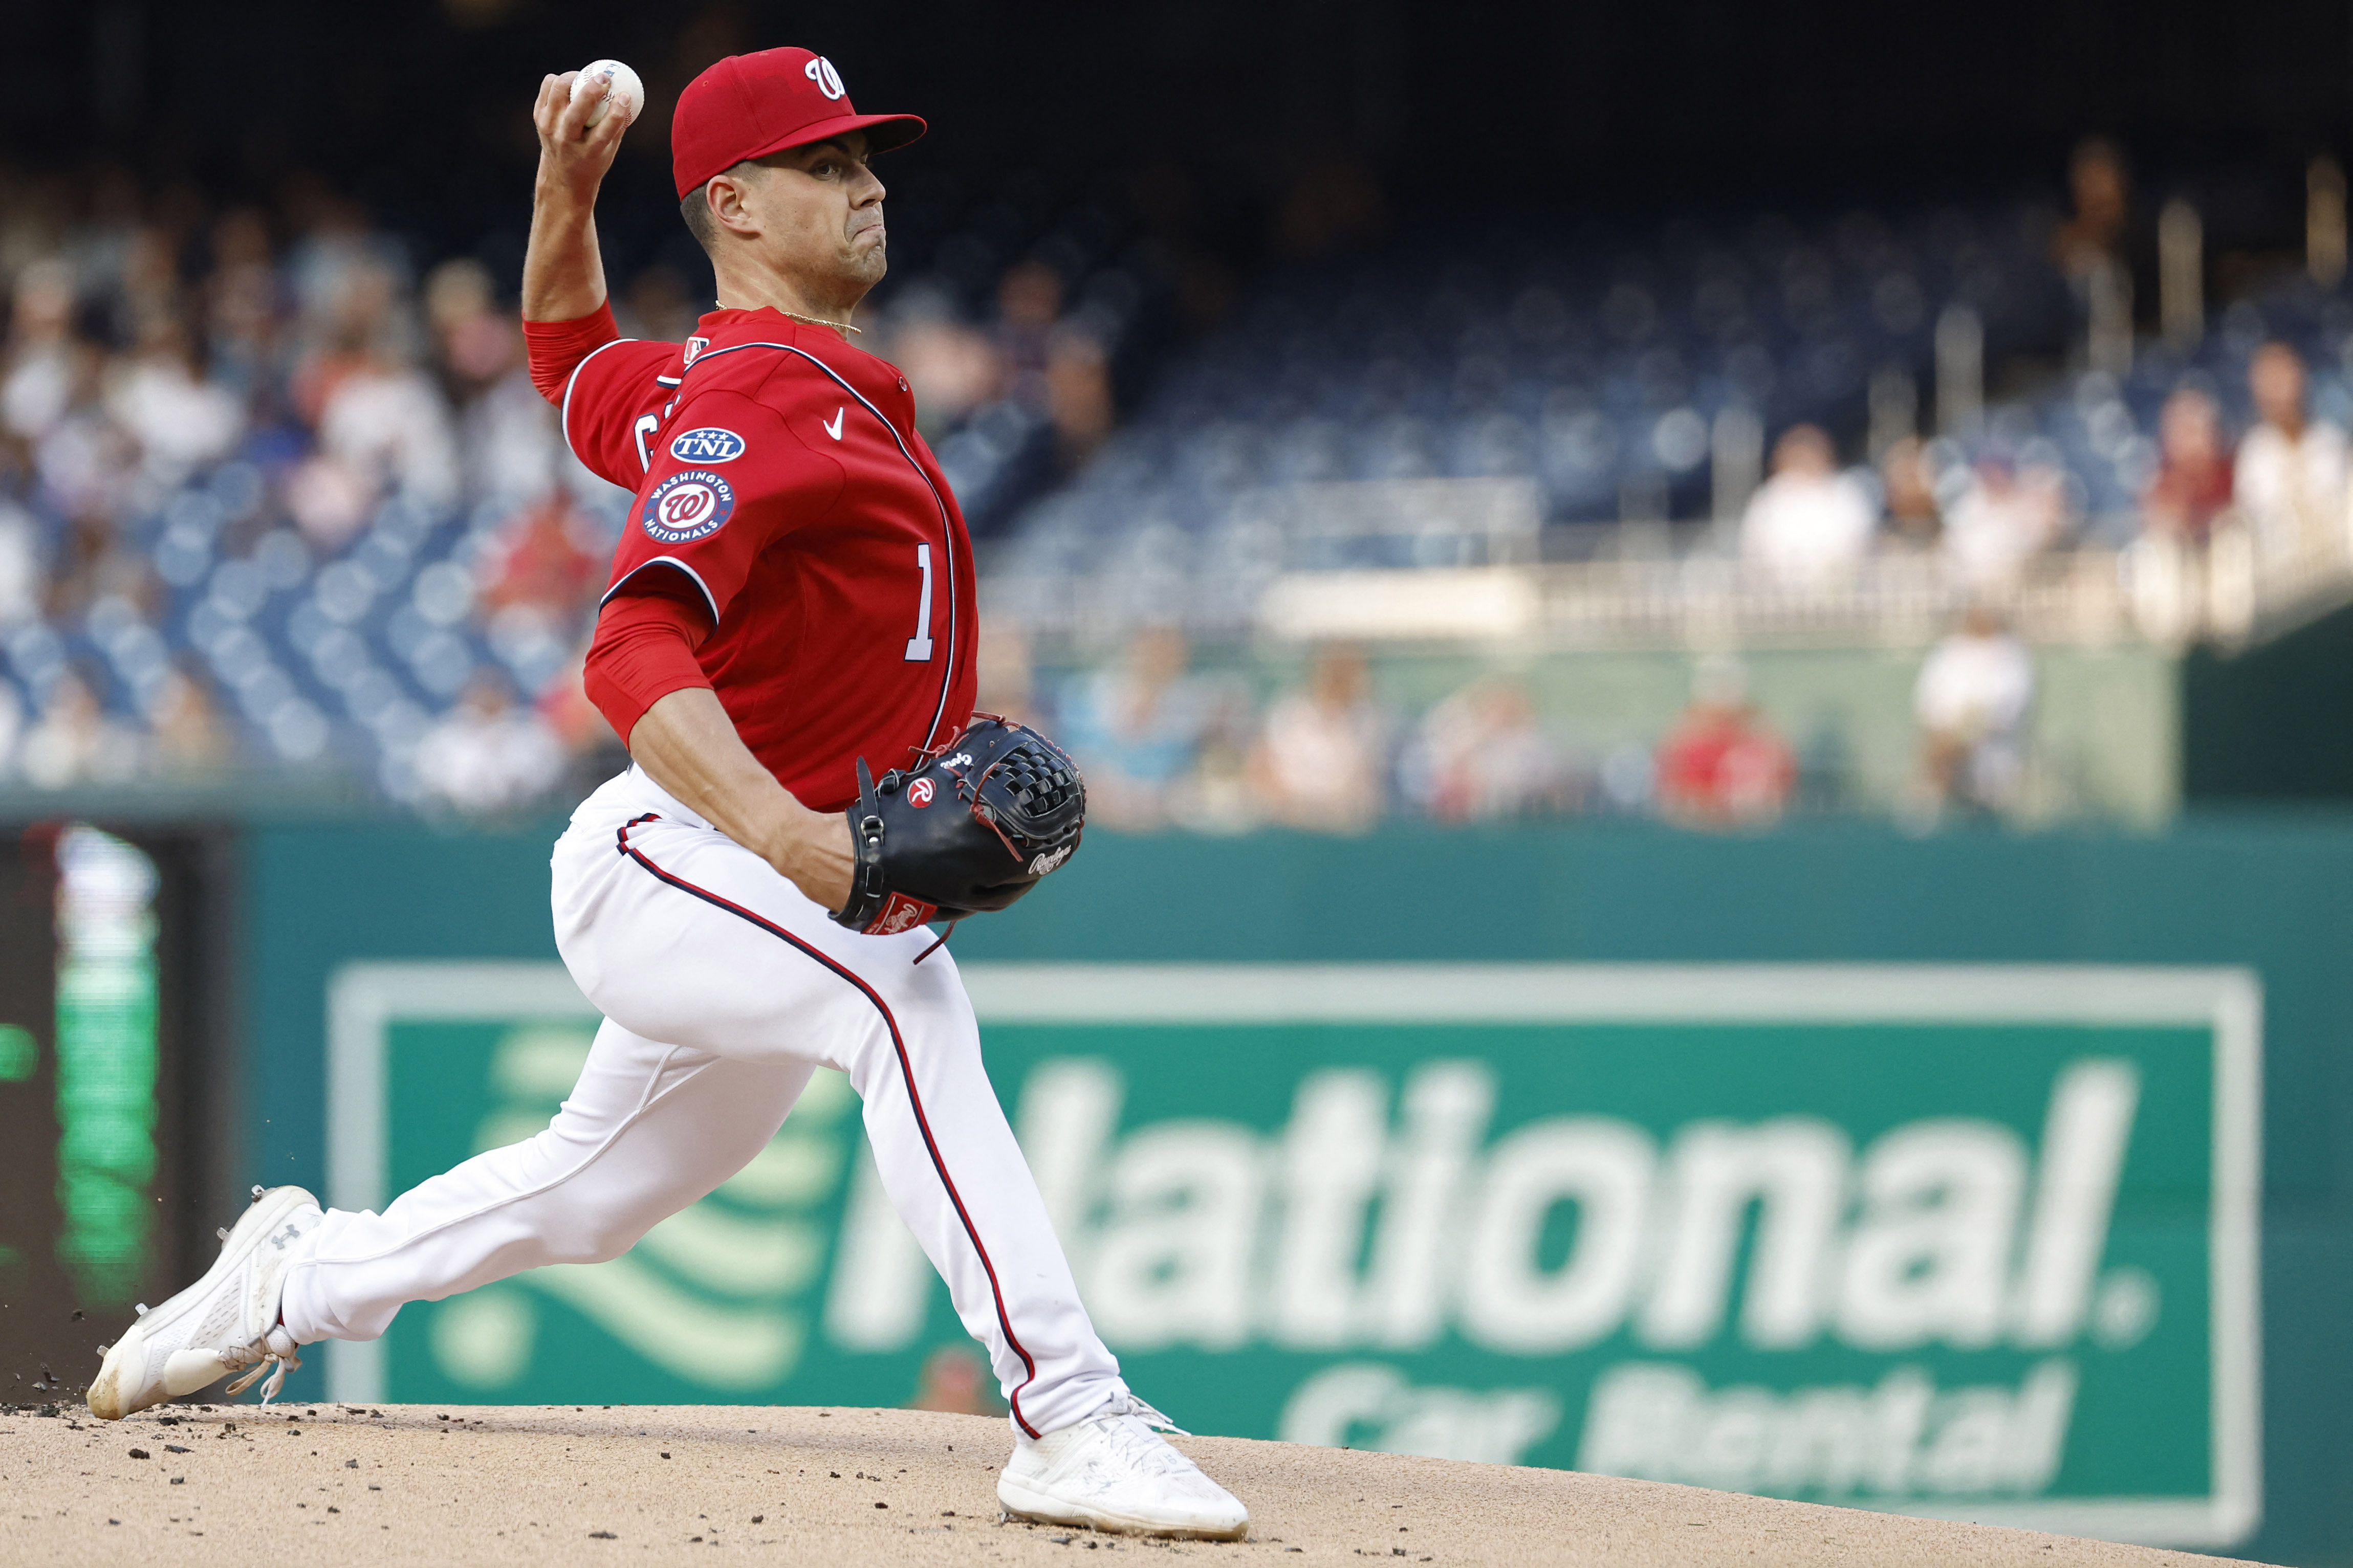 MacKenzie Gore pulled early in Nationals loss to the Angels - The